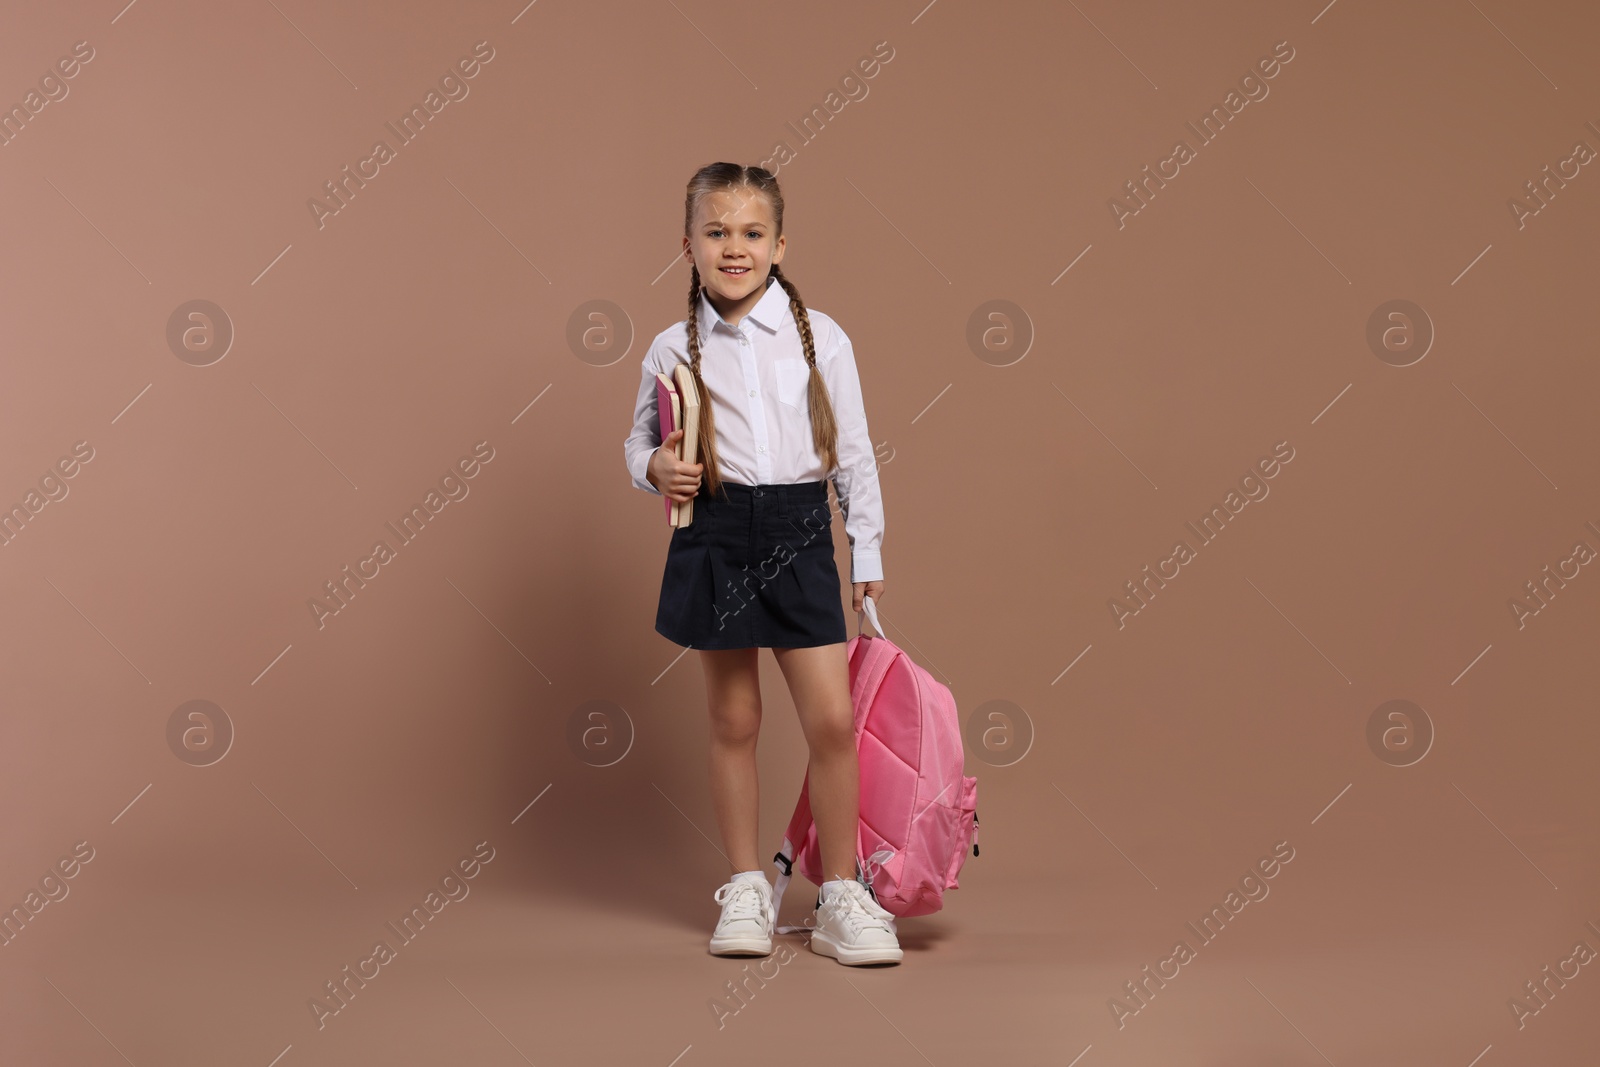 Photo of Happy schoolgirl with backpack and books on brown background